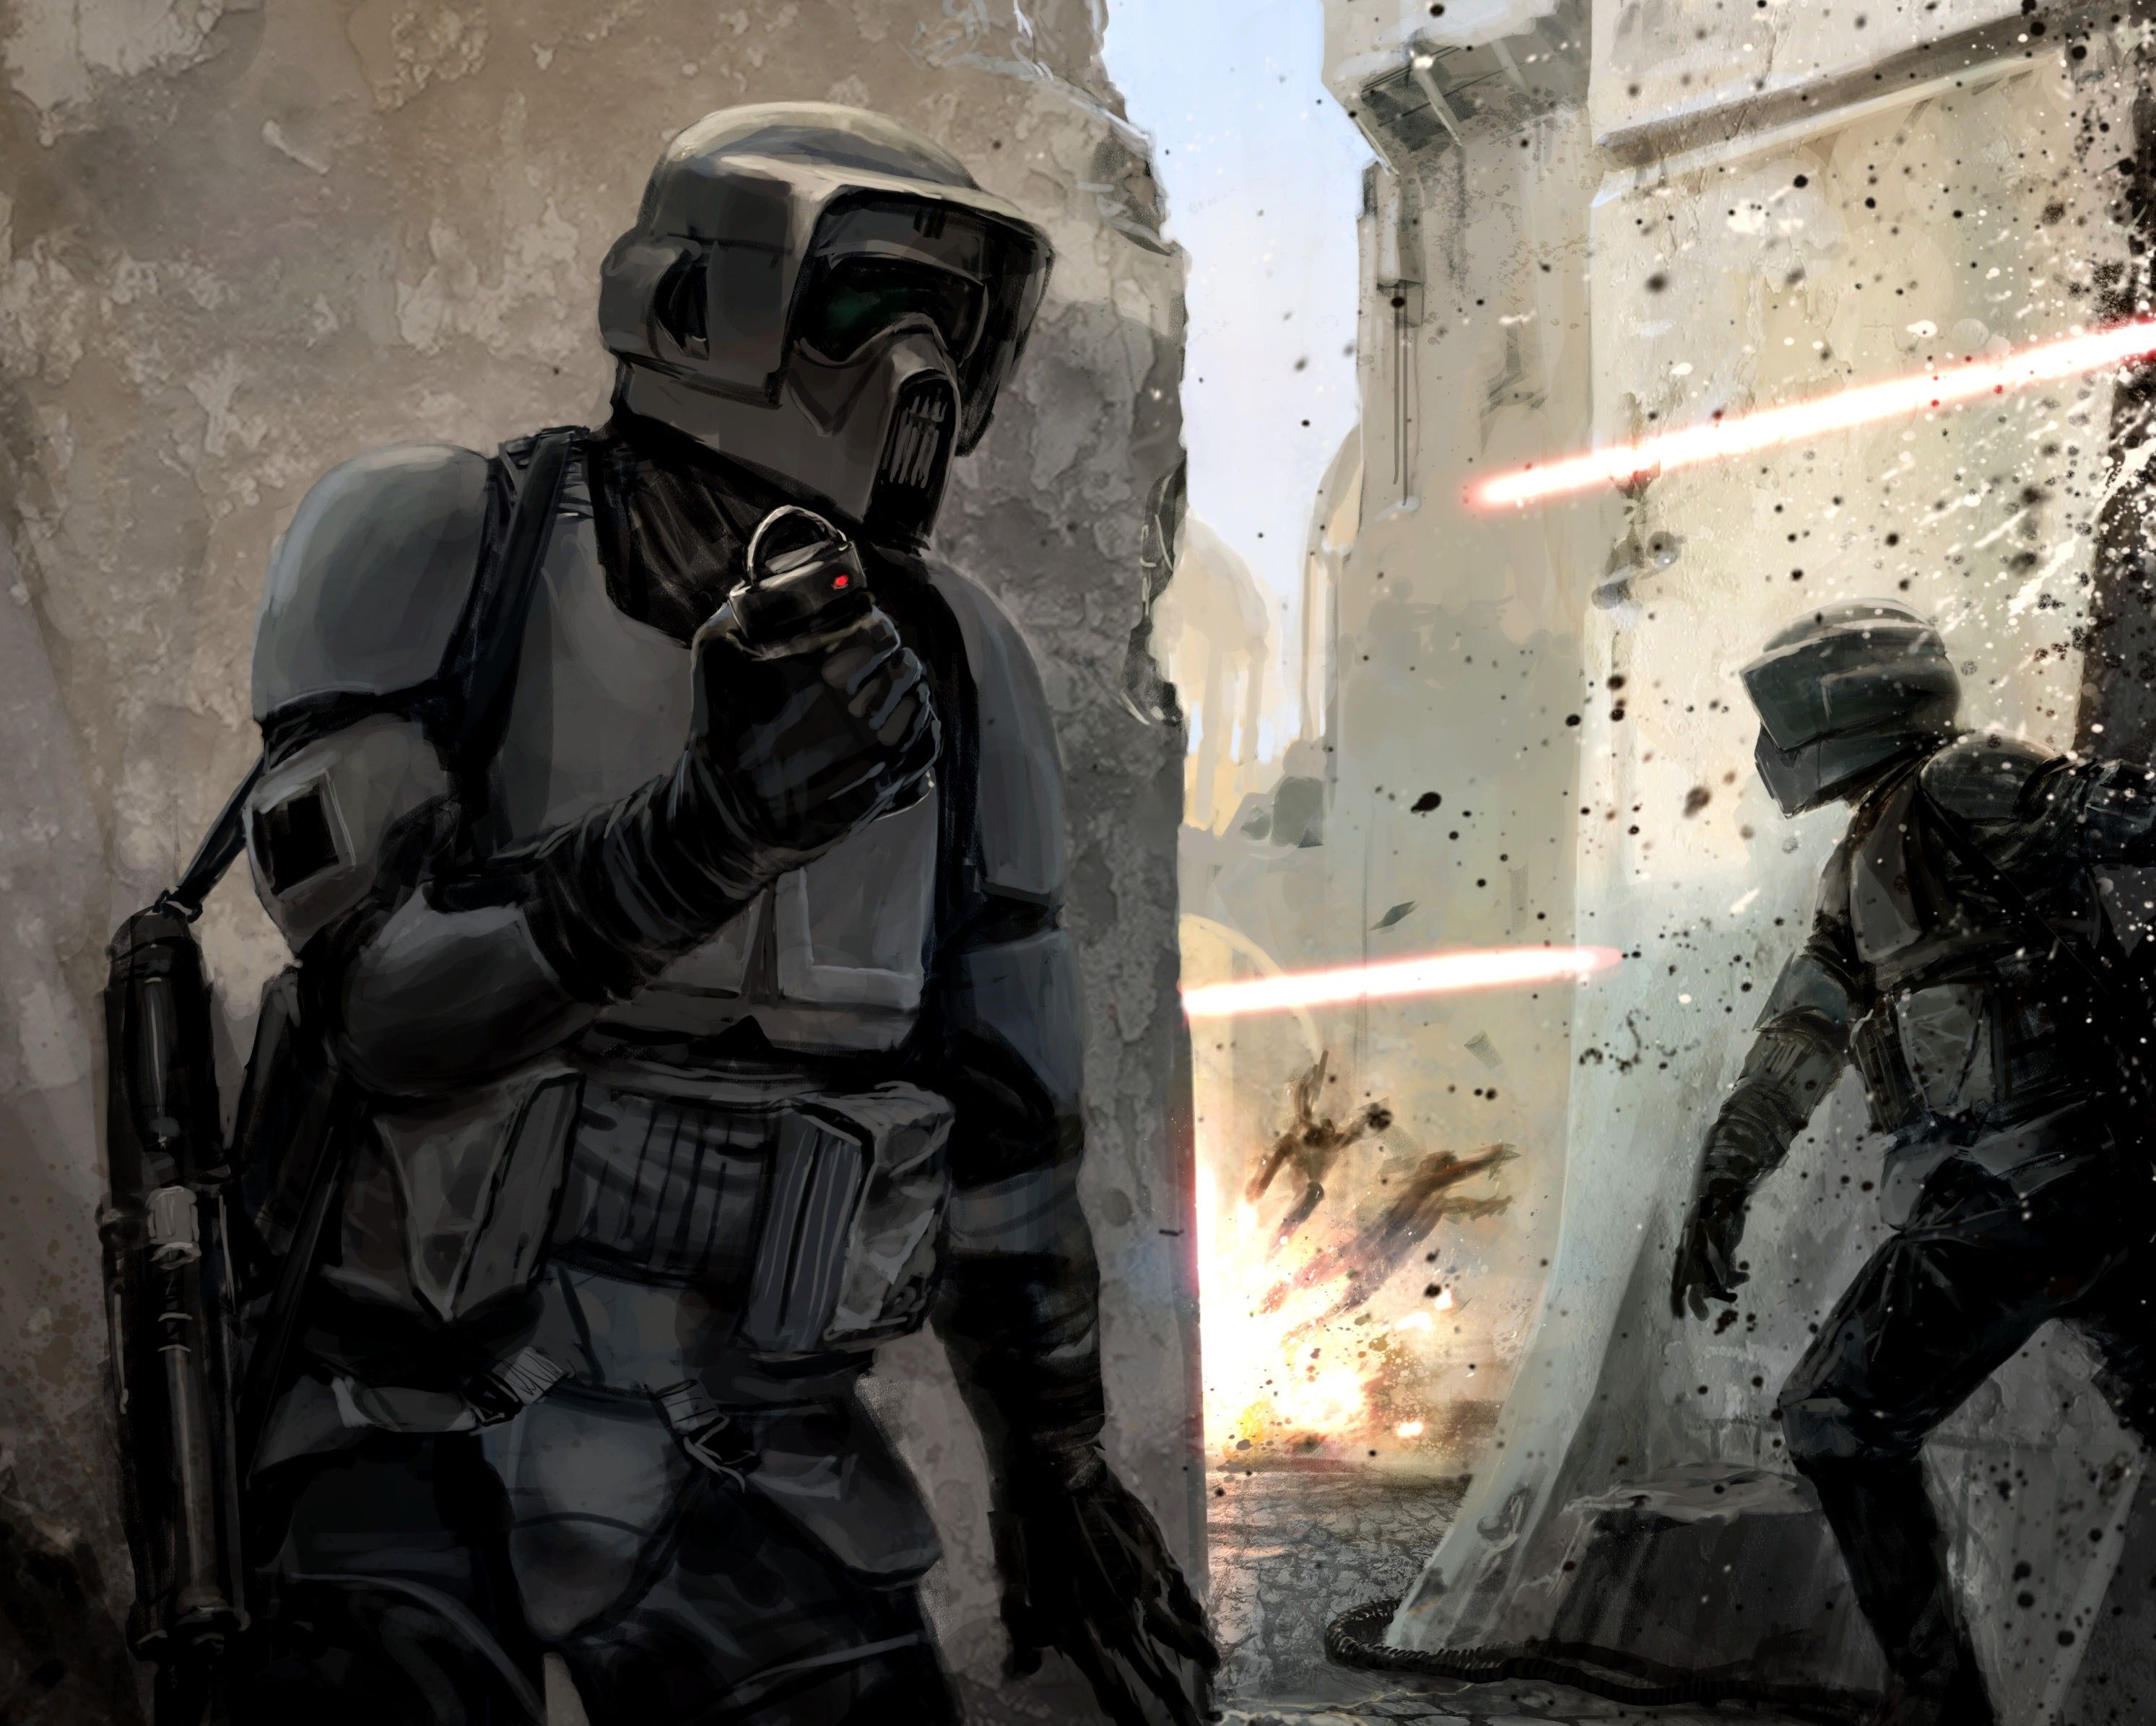 Star Wars, soldiers, movies, futuristic, stormtroopers, grenades, science f...